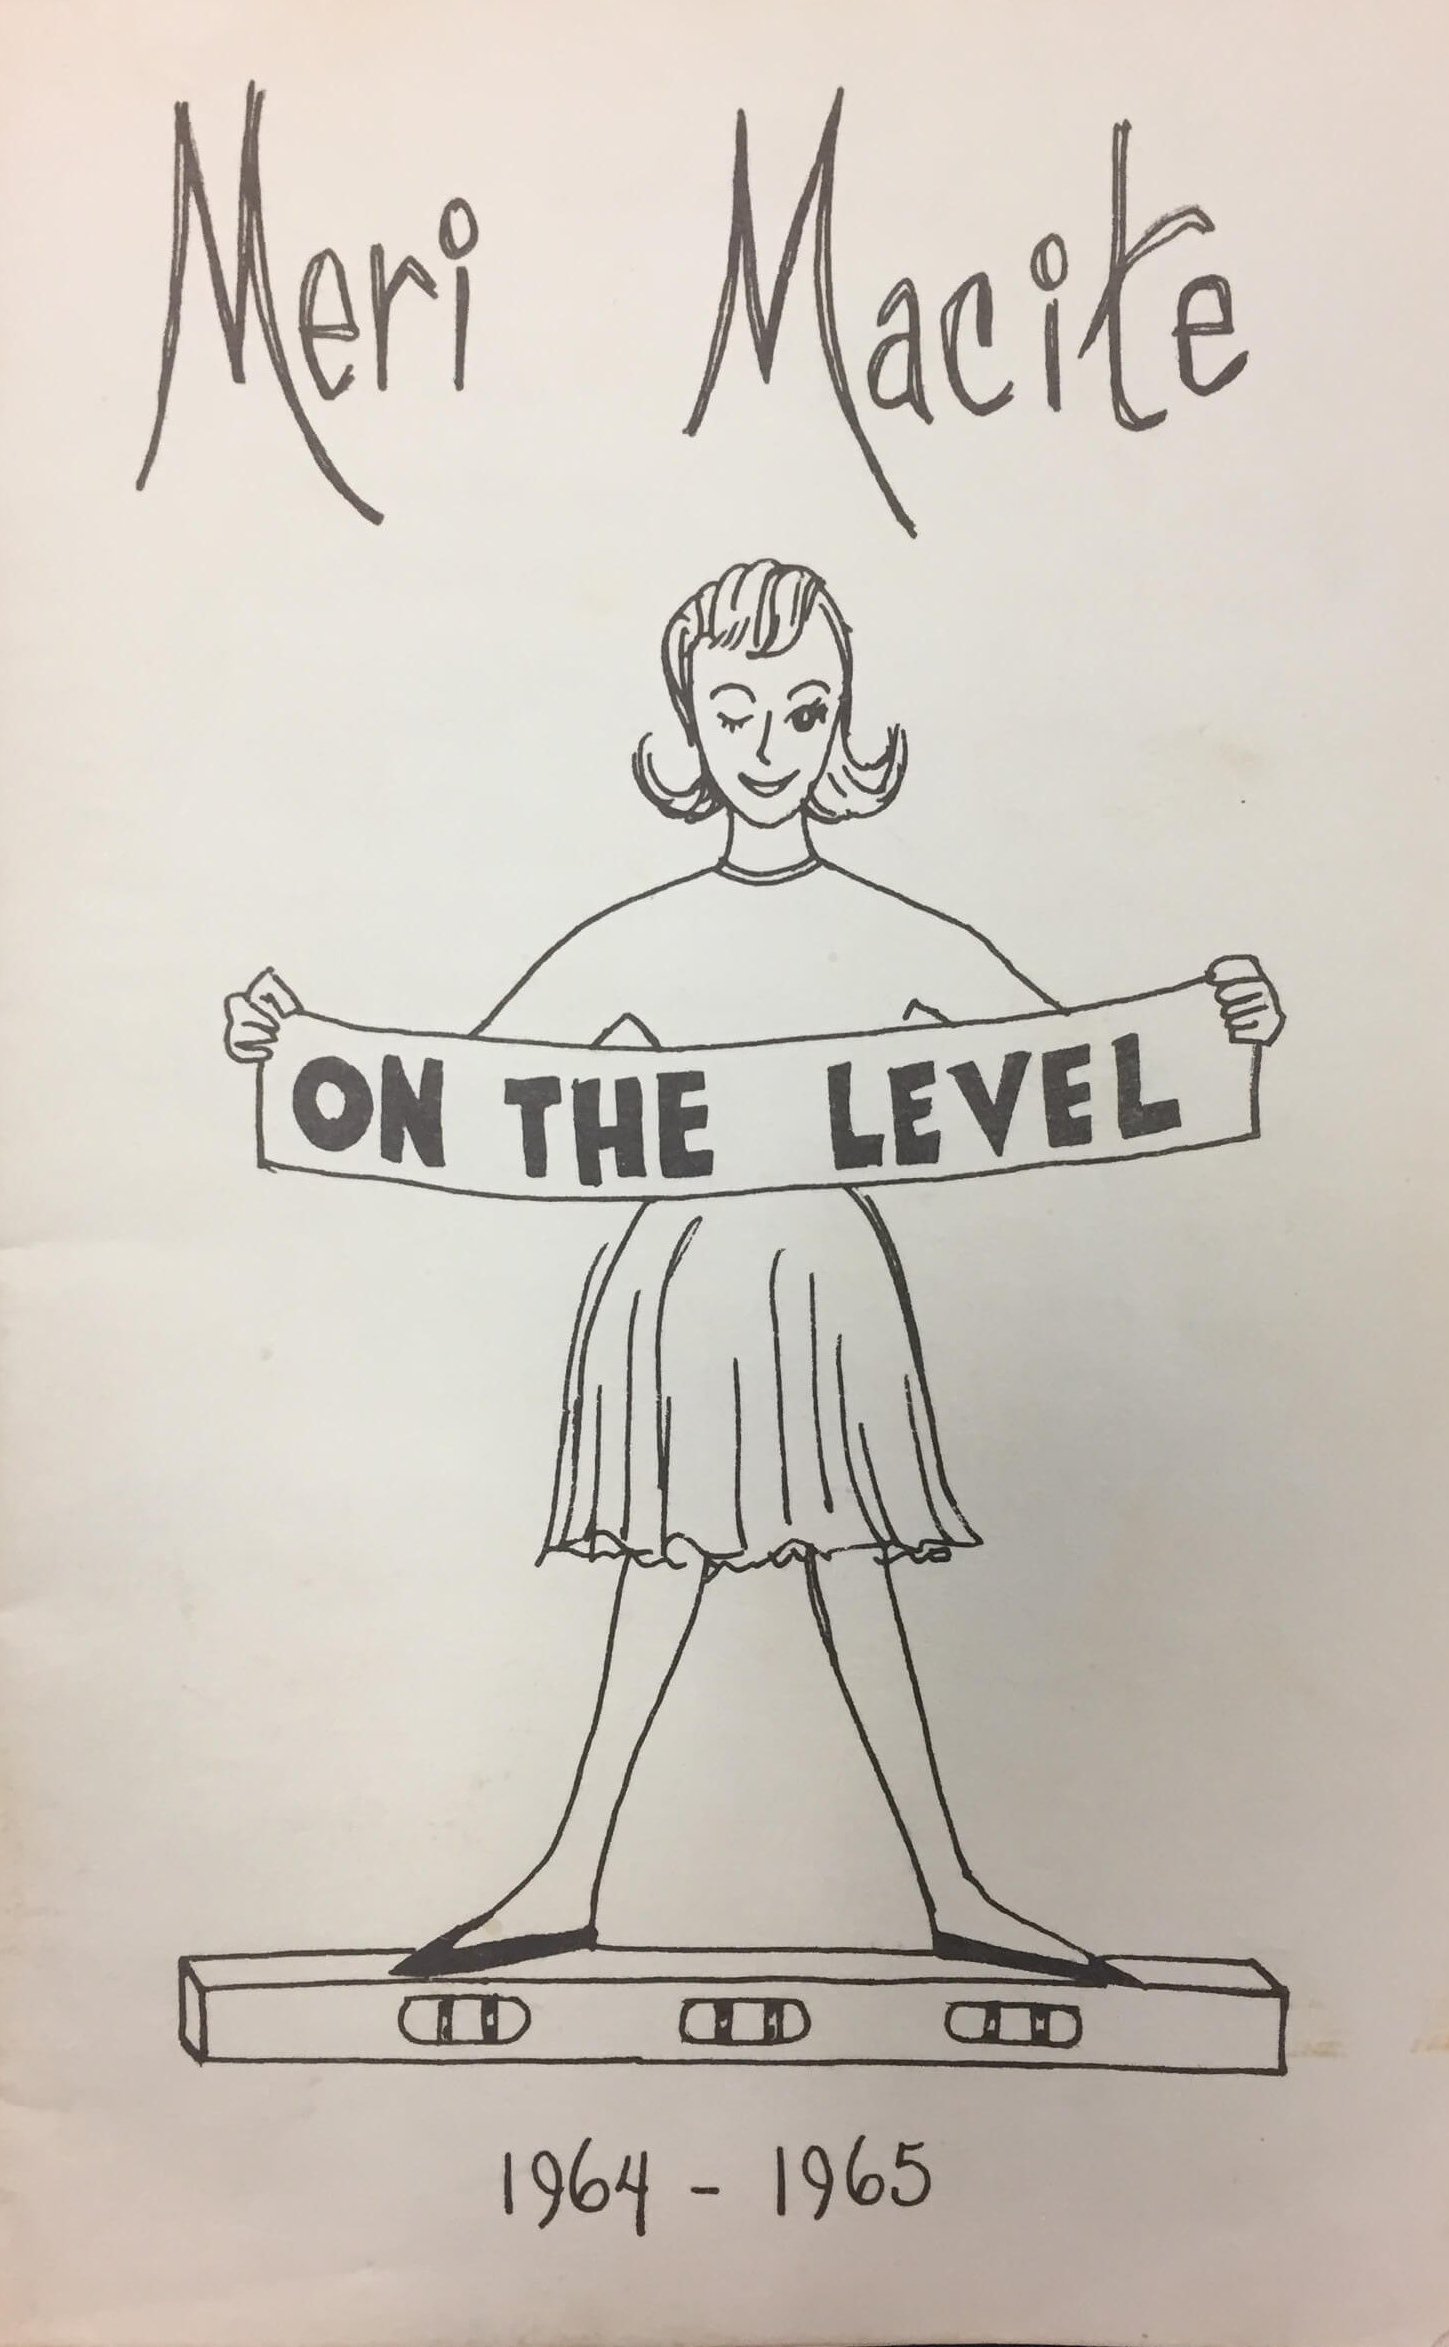 Cover of a student newsletter.